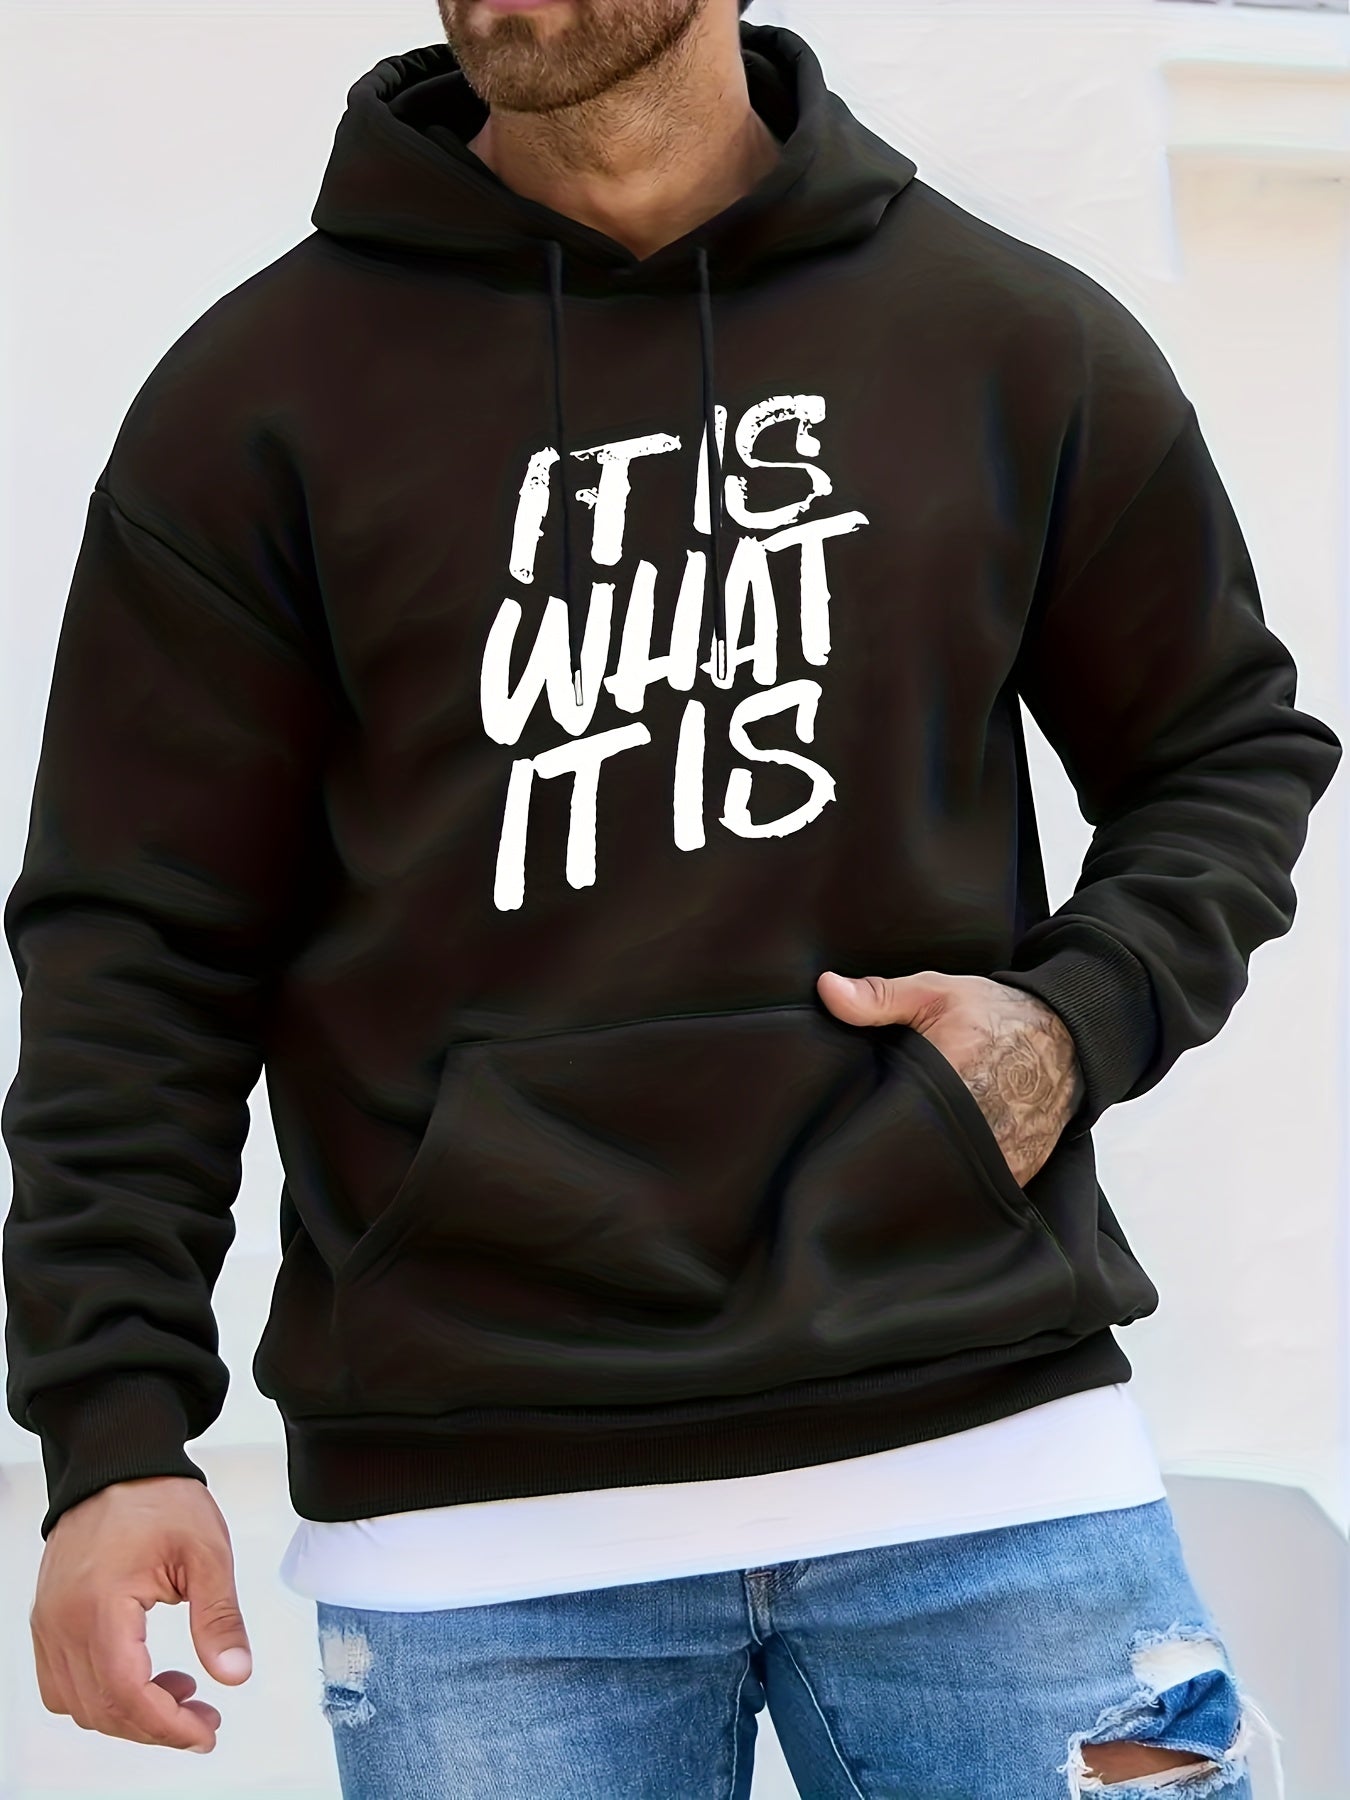 "IT IS WHAT IT IS" Print, Hoodies For Men, Graphic Sweatshirt With Kangaroo Pocket, Comfy Trendy Hooded Pullover, Mens Clothing For Fall Winter